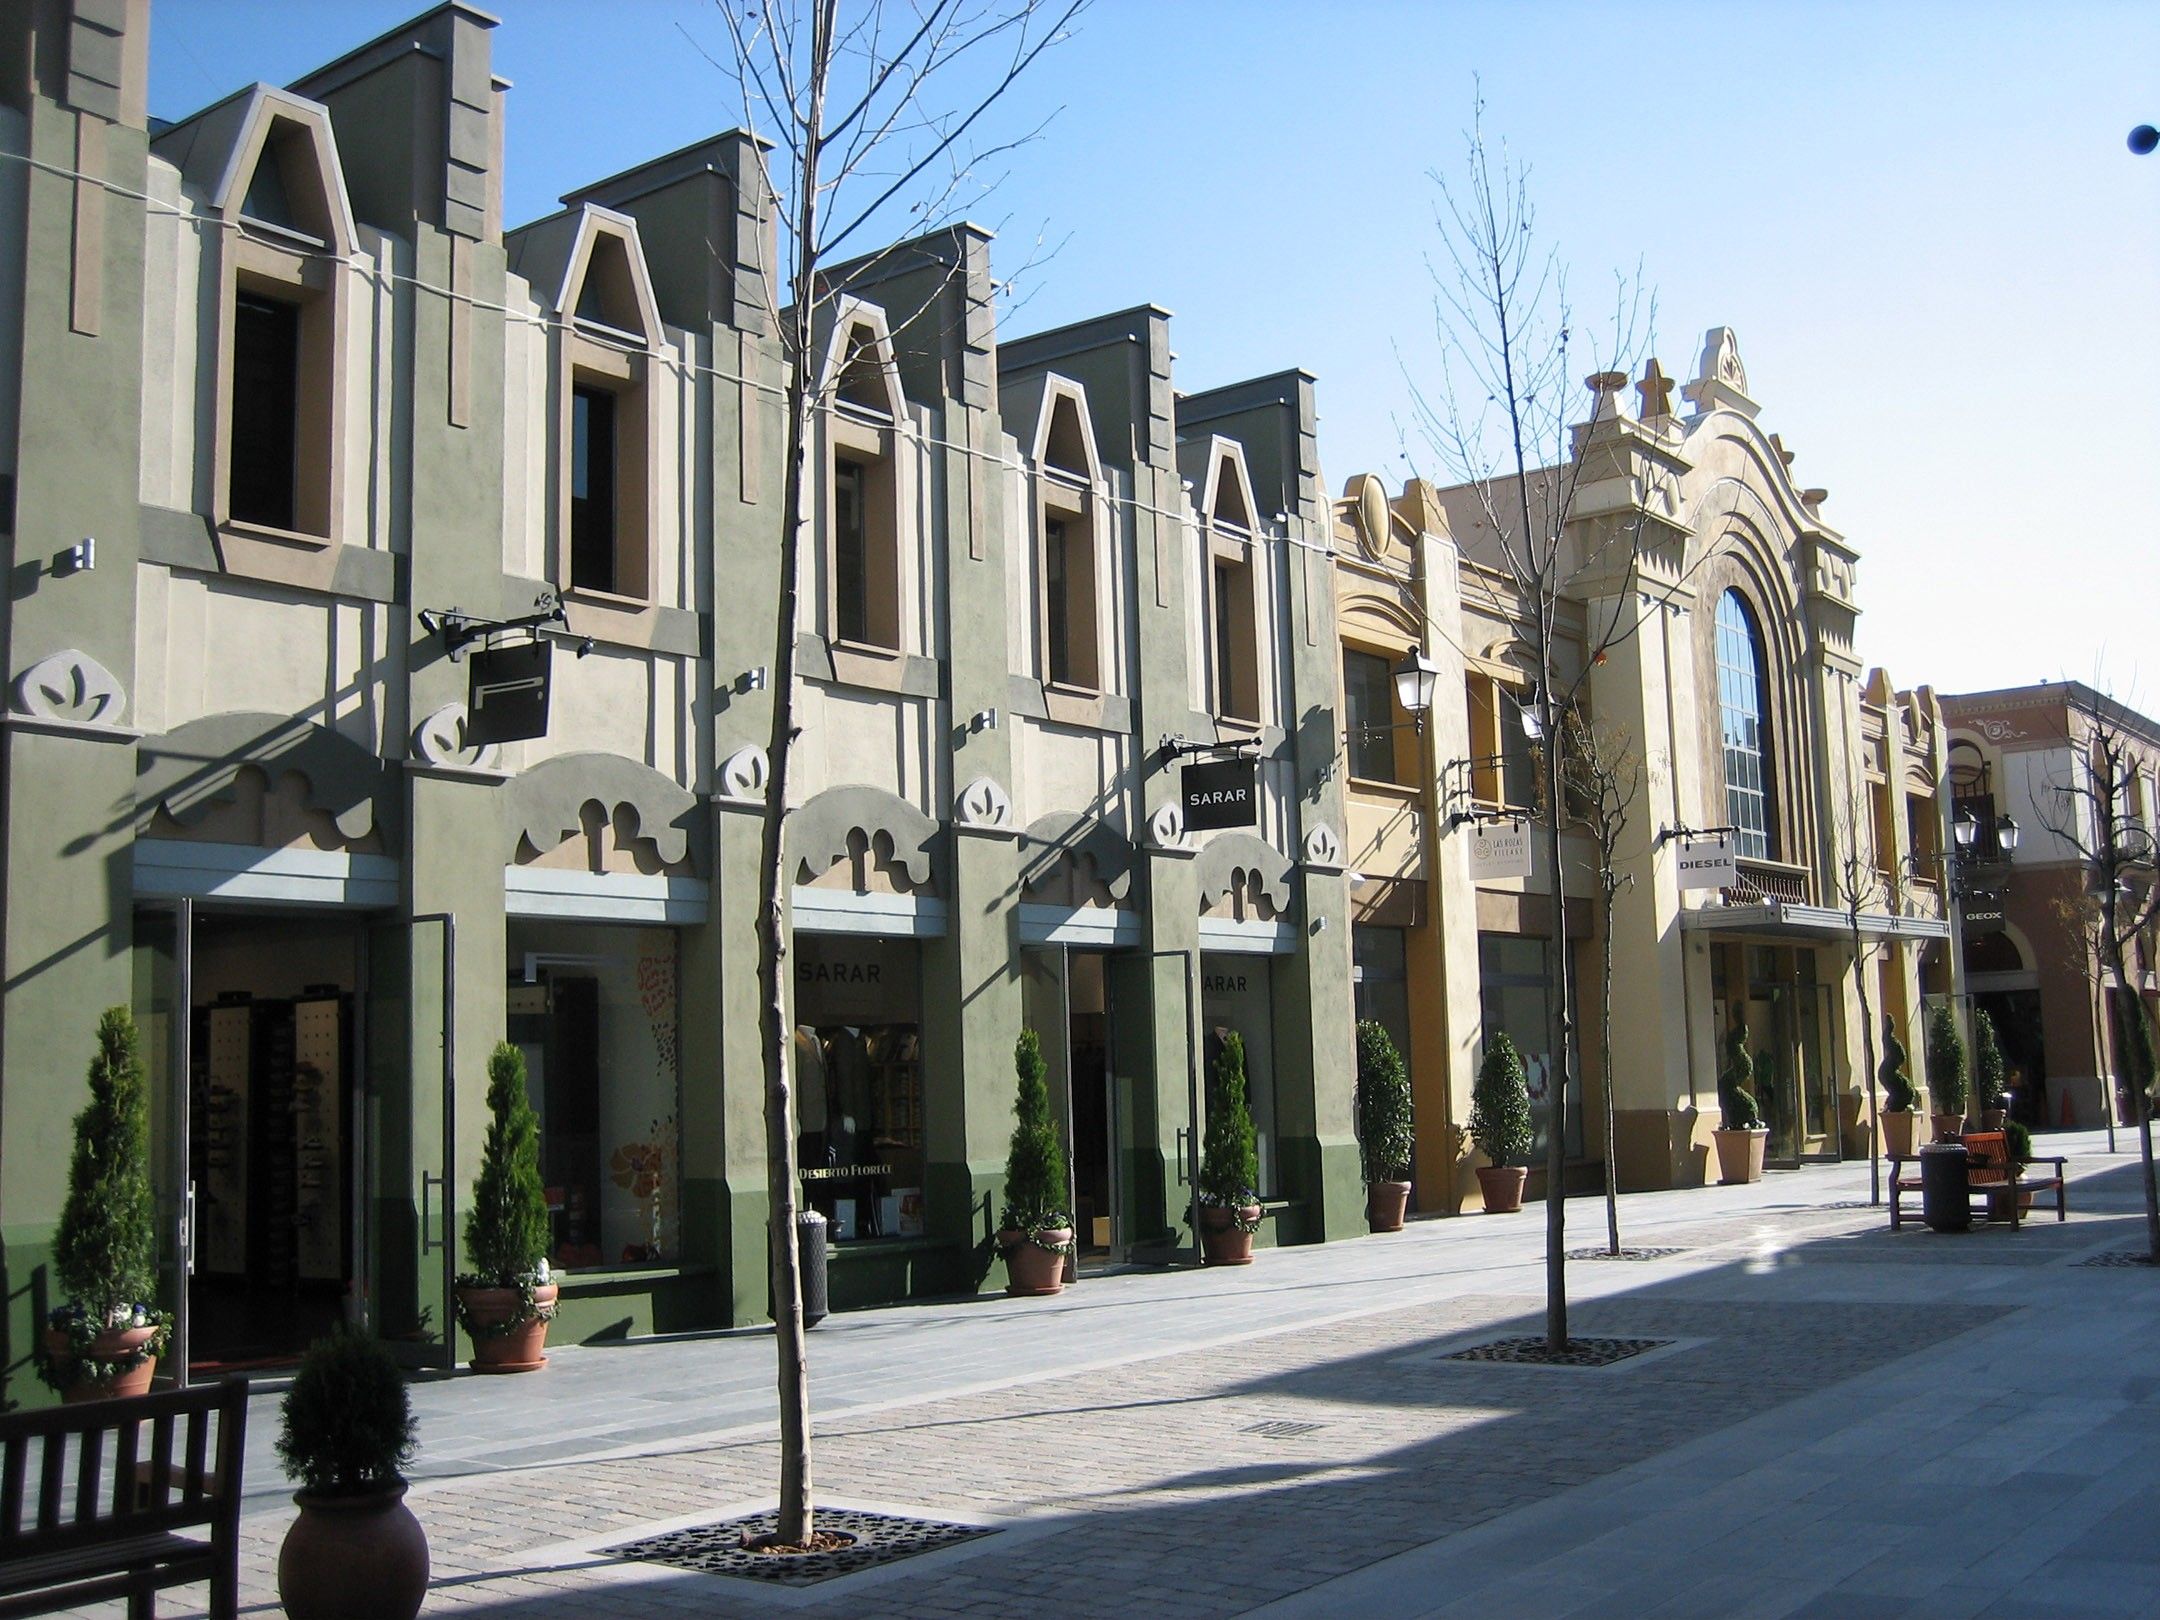 The outlet in Madrid ... an unforgettable shopping experience